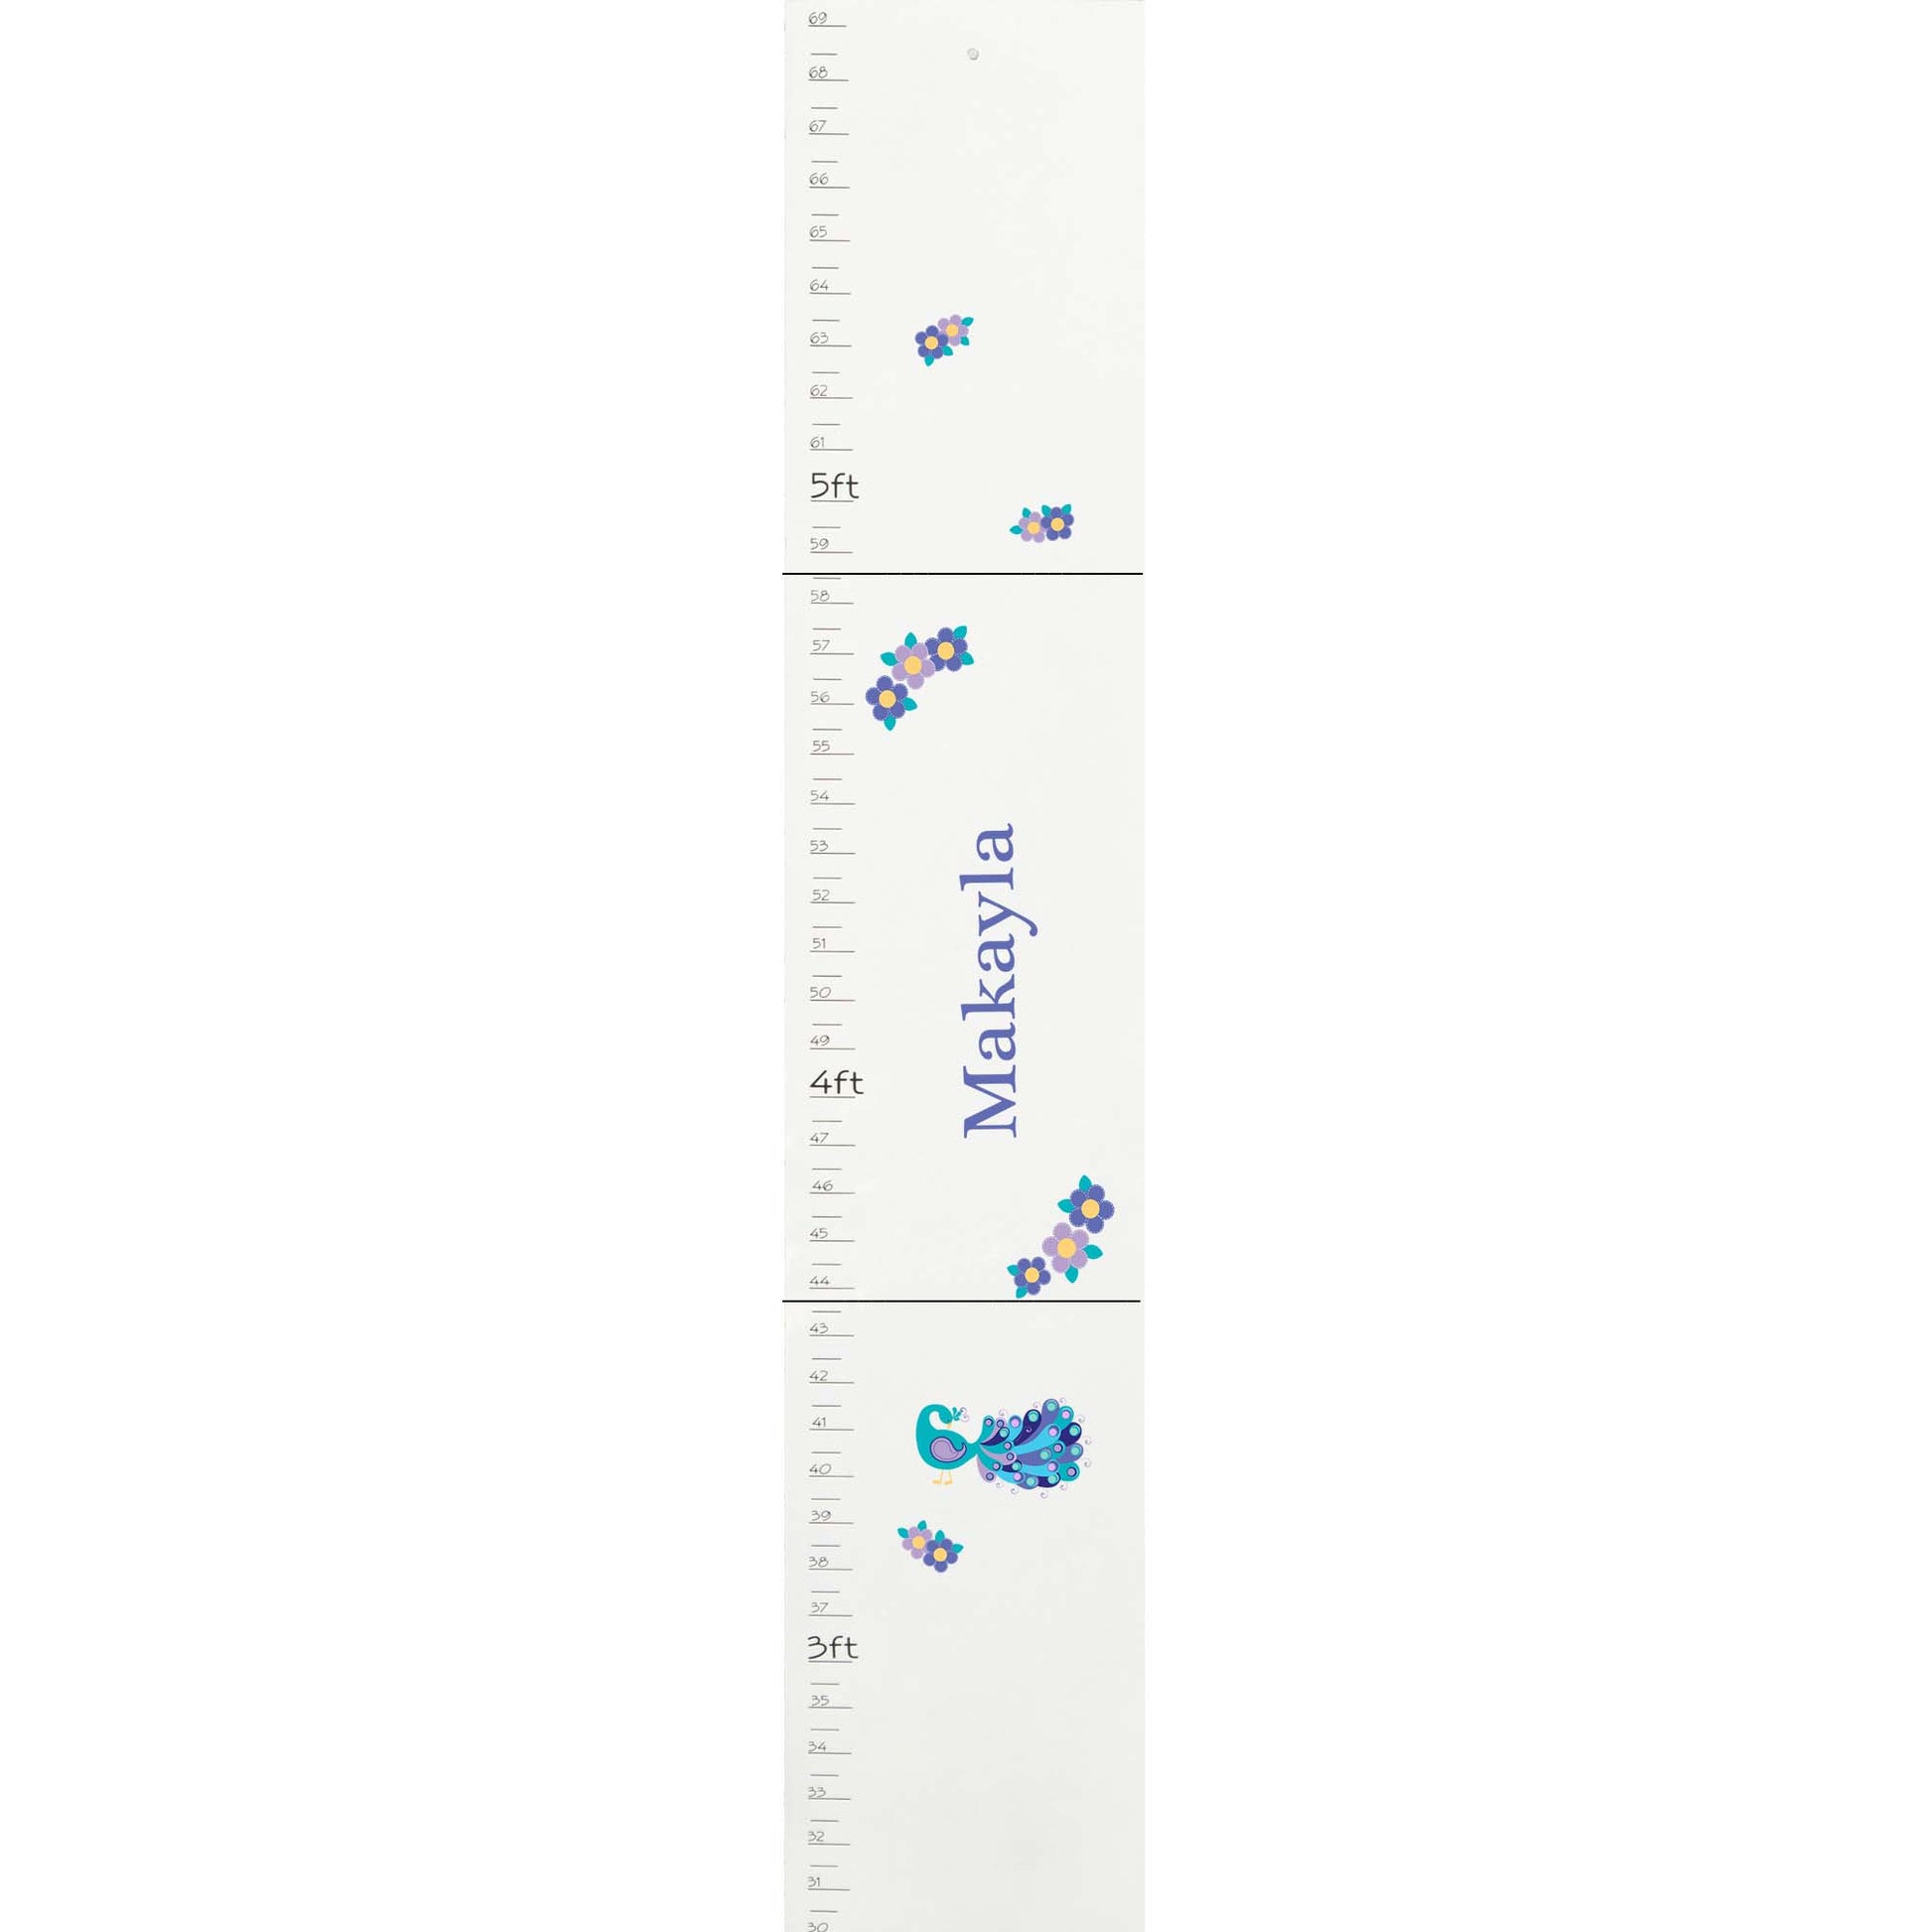 Personalized White Growth Chart With World Map Pink Design